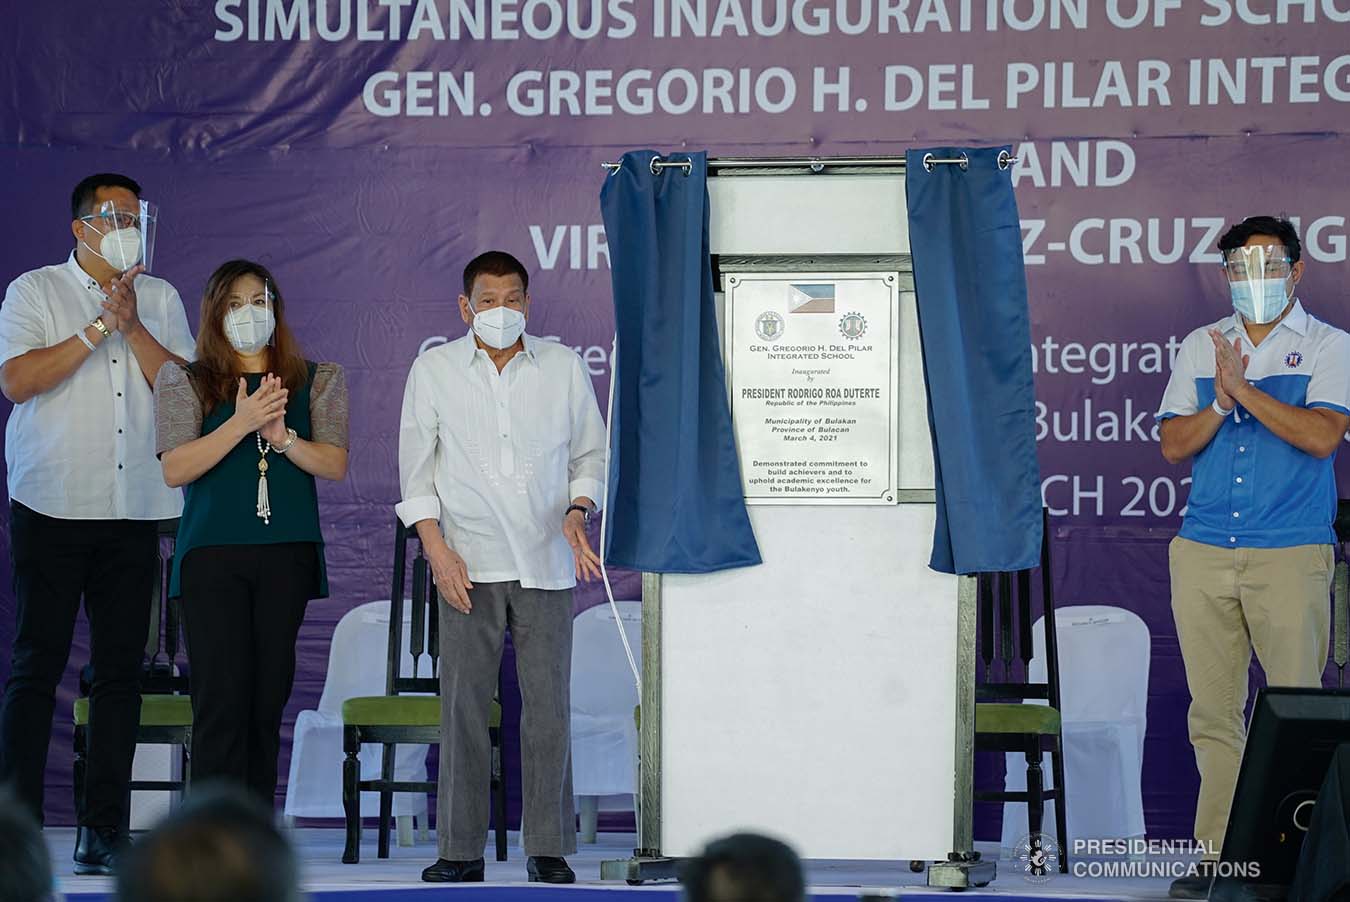 President Rodrigo Roa Duterte, assisted by DWPH Secretary Mark Villar and Bulacan Governor Daniel Fernando, leads the unveiling of marker of the newly constructed Gen. Gregorio H. Del Pilar Integrated School and Virginia Ramirez-Cruz High School buildings in Bulakan, Bulacan on March 4, 2021. Also present were Senator Christopher Lawrence Go, President Duterte's partner Honeylet Avanceña, and local officials of Bulacan province. KING RODRIGUEZ/ PRESIDENTIAL PHOTO